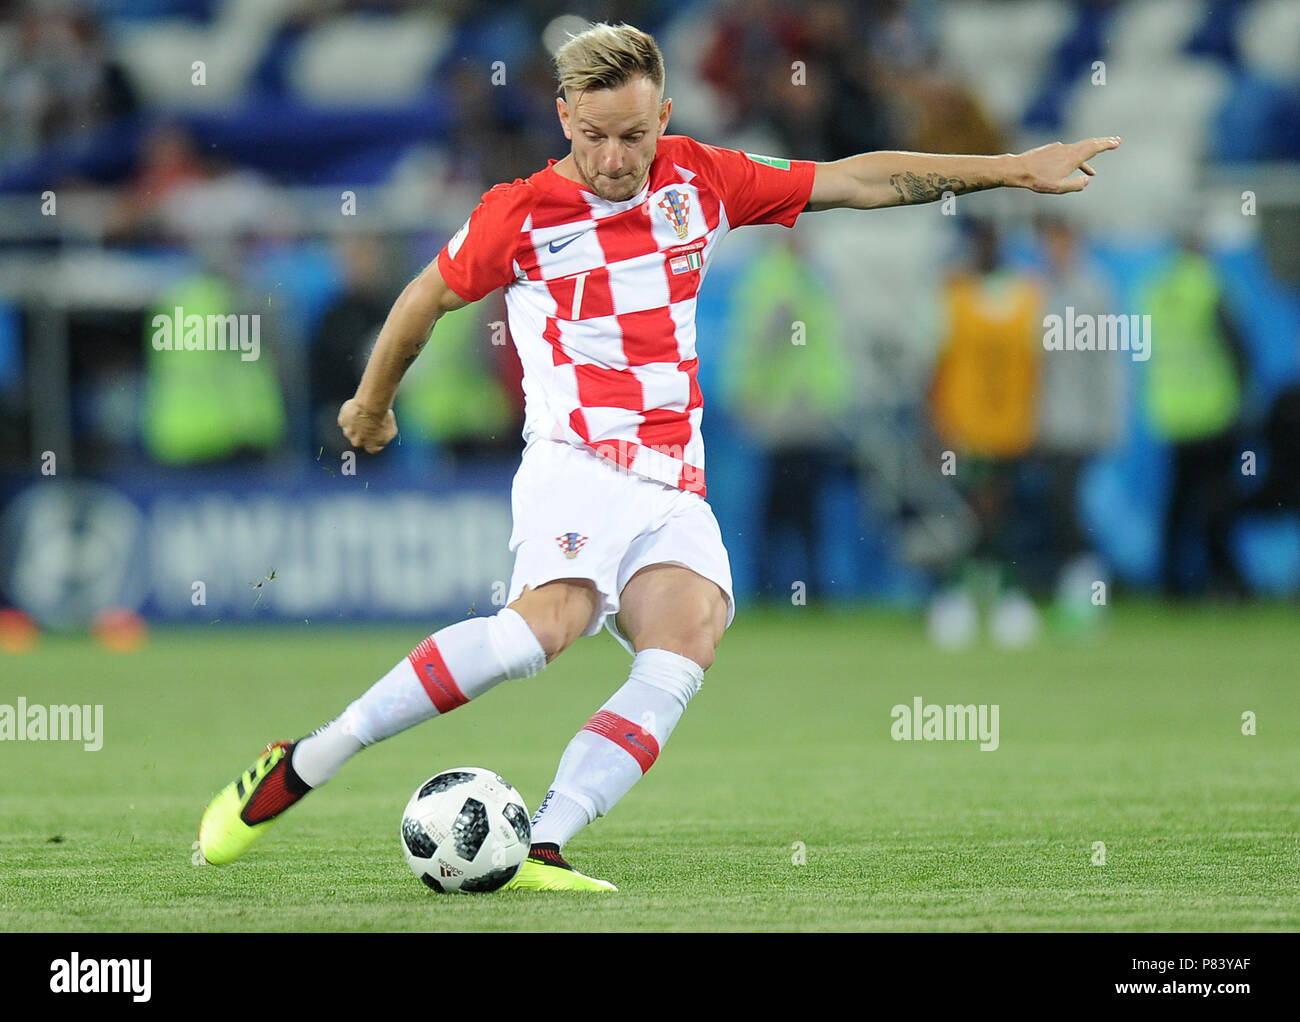 KALININGRAD, RUSSIA - JUNE 16: Ivan Rakitic of Croatia in action during the 2018 FIFA World Cup Russia group D match between Croatia and Nigeria at Kaliningrad Stadium on June 16, 2018 in Kaliningrad, Russia. (Photo by Norbert Barczyk/PressFocus/MB Media) Stock Photo